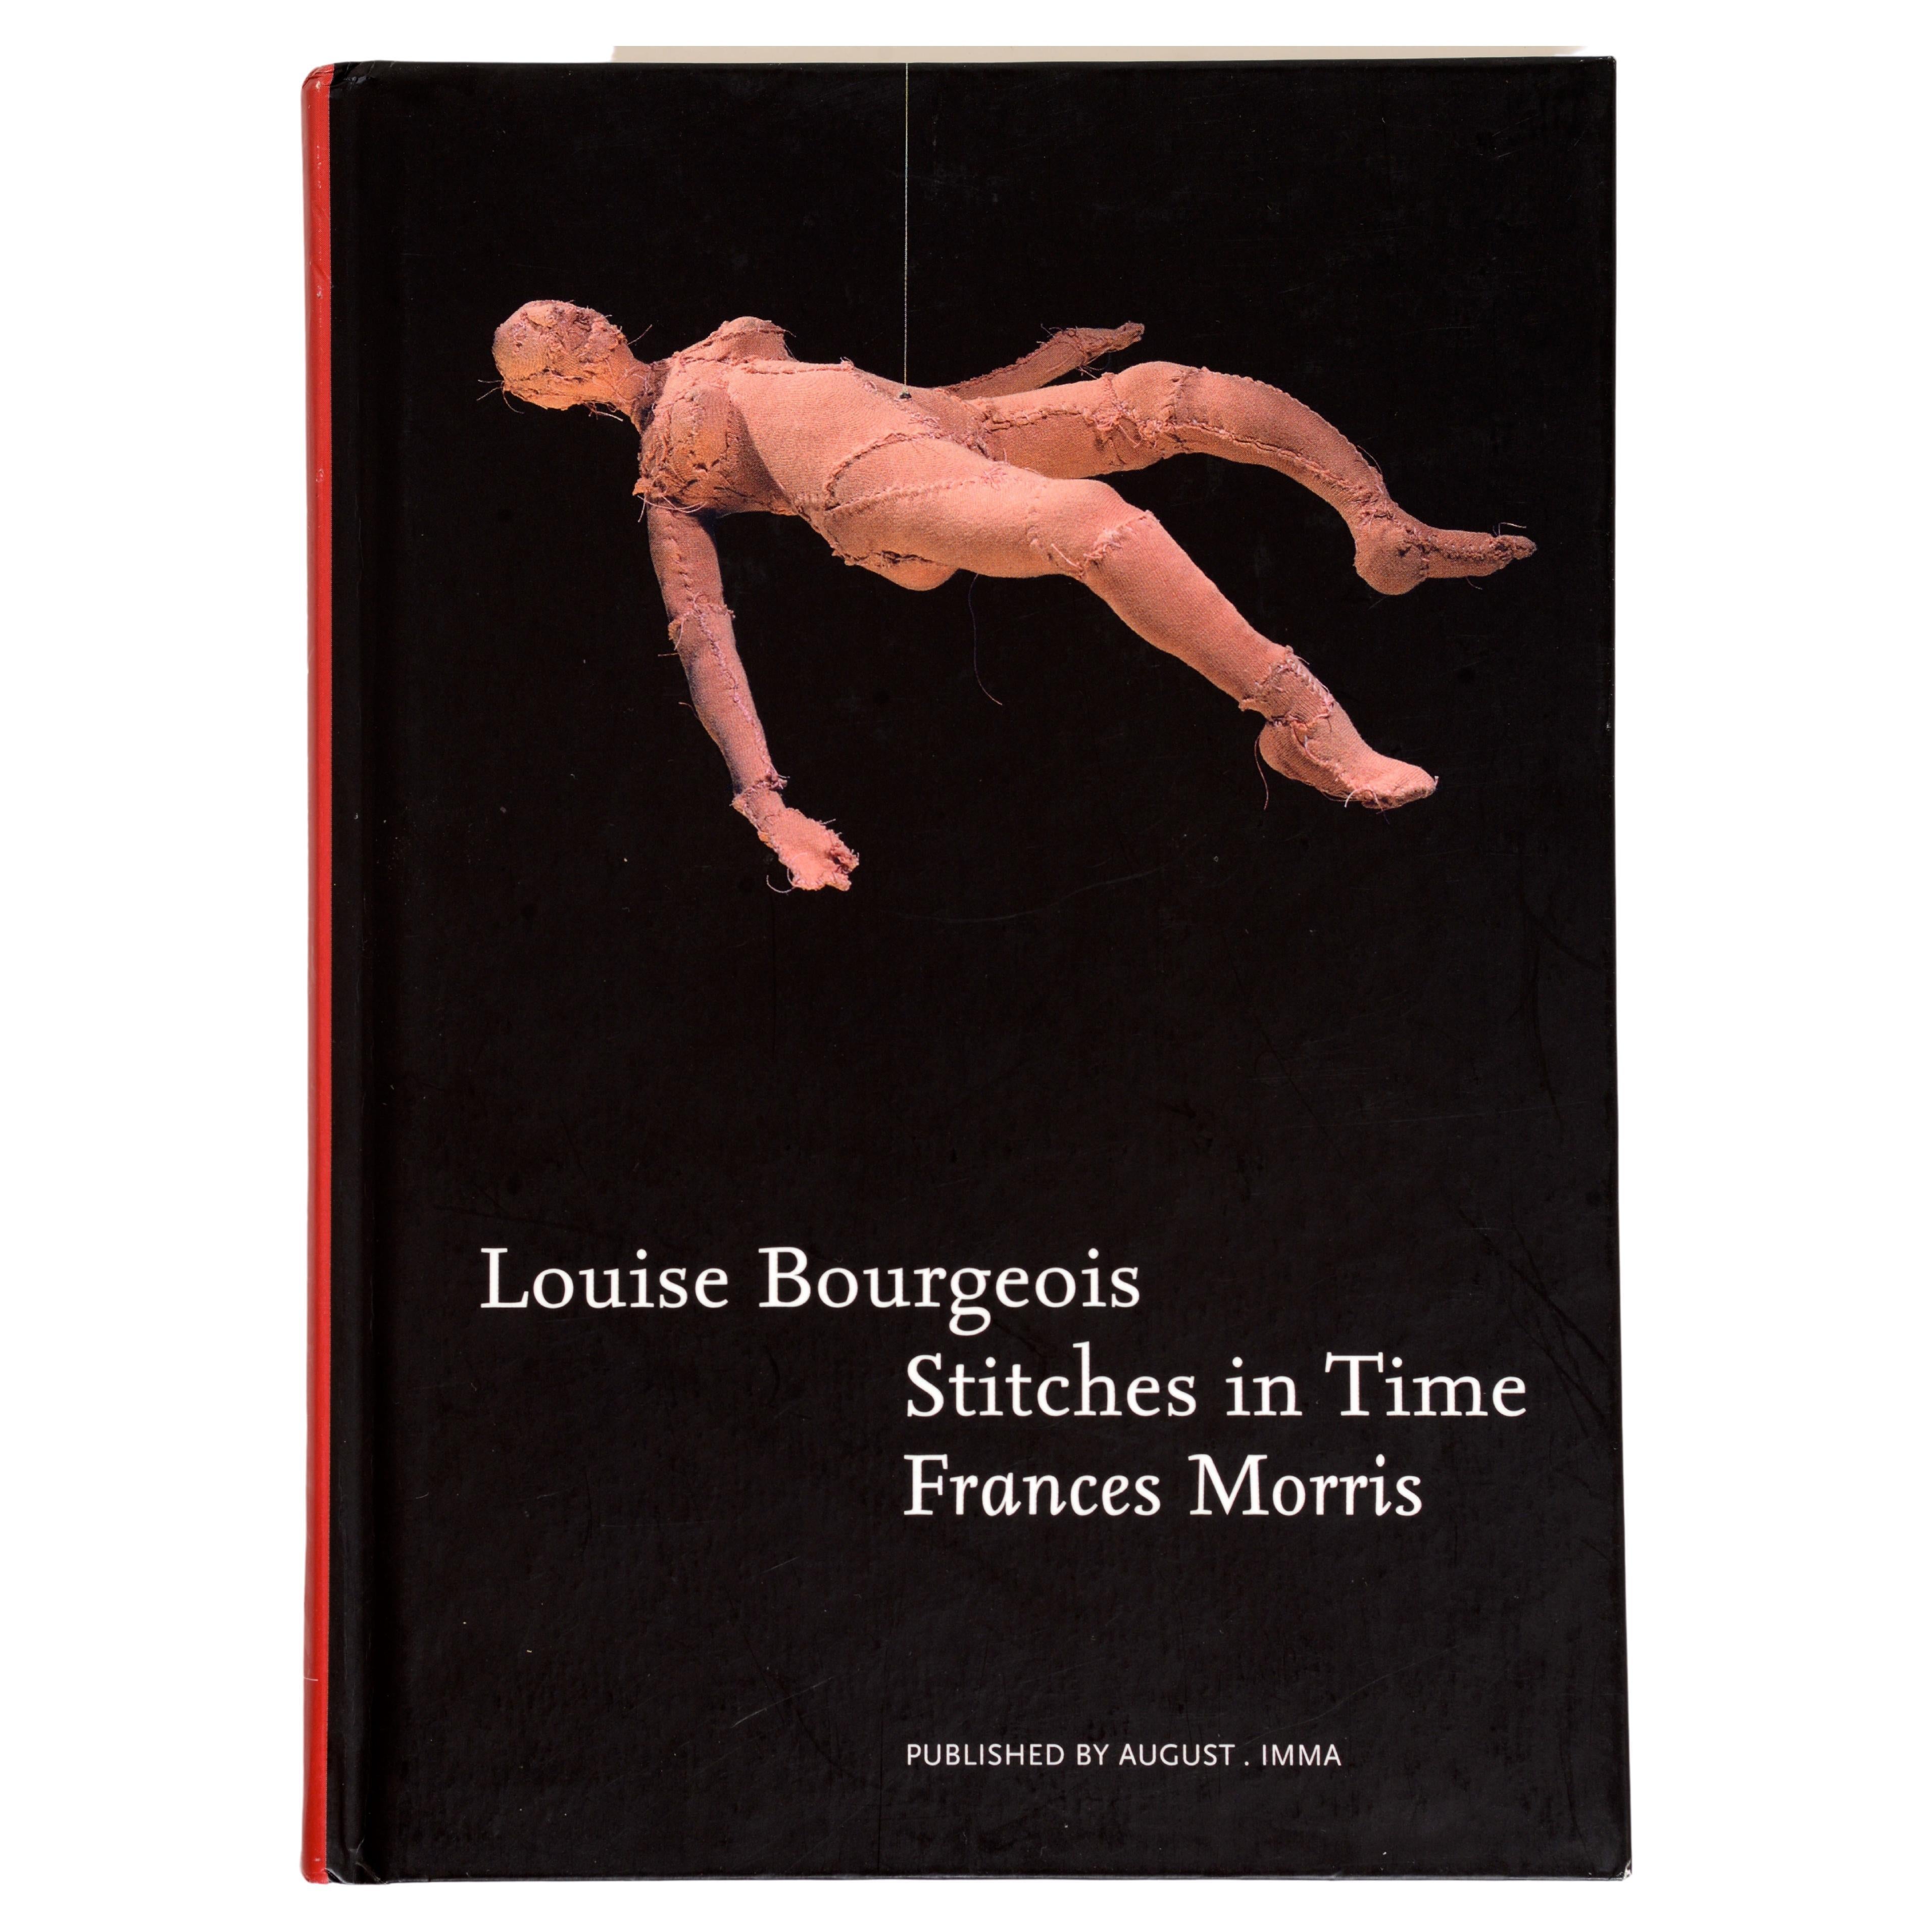 Louise Bourgeois: Stitches in Time by Frances Morris, 1st Ed